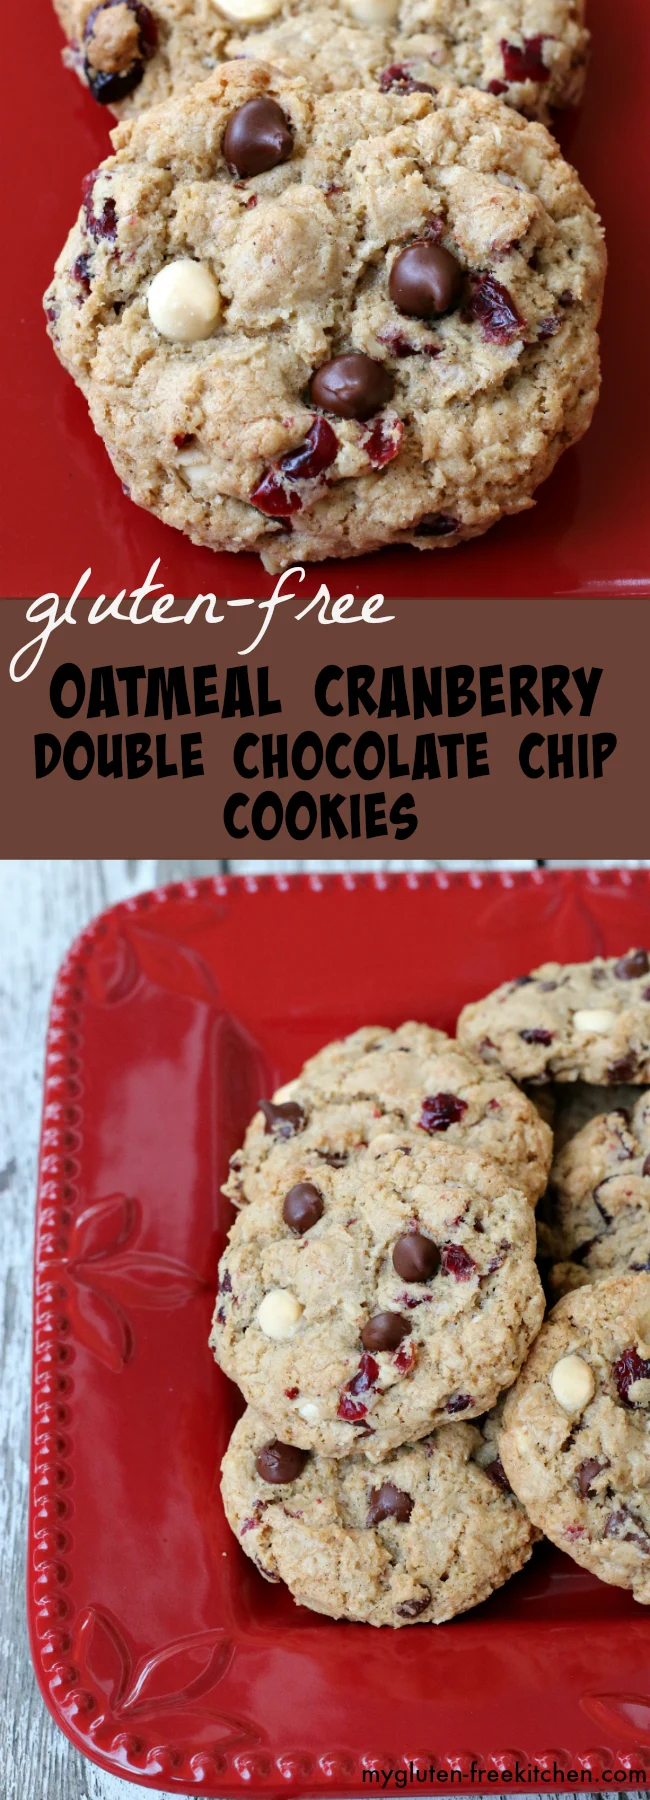 Gluten-free Oatmeal Cranberry Double Chocolate Chip Cookies recipe